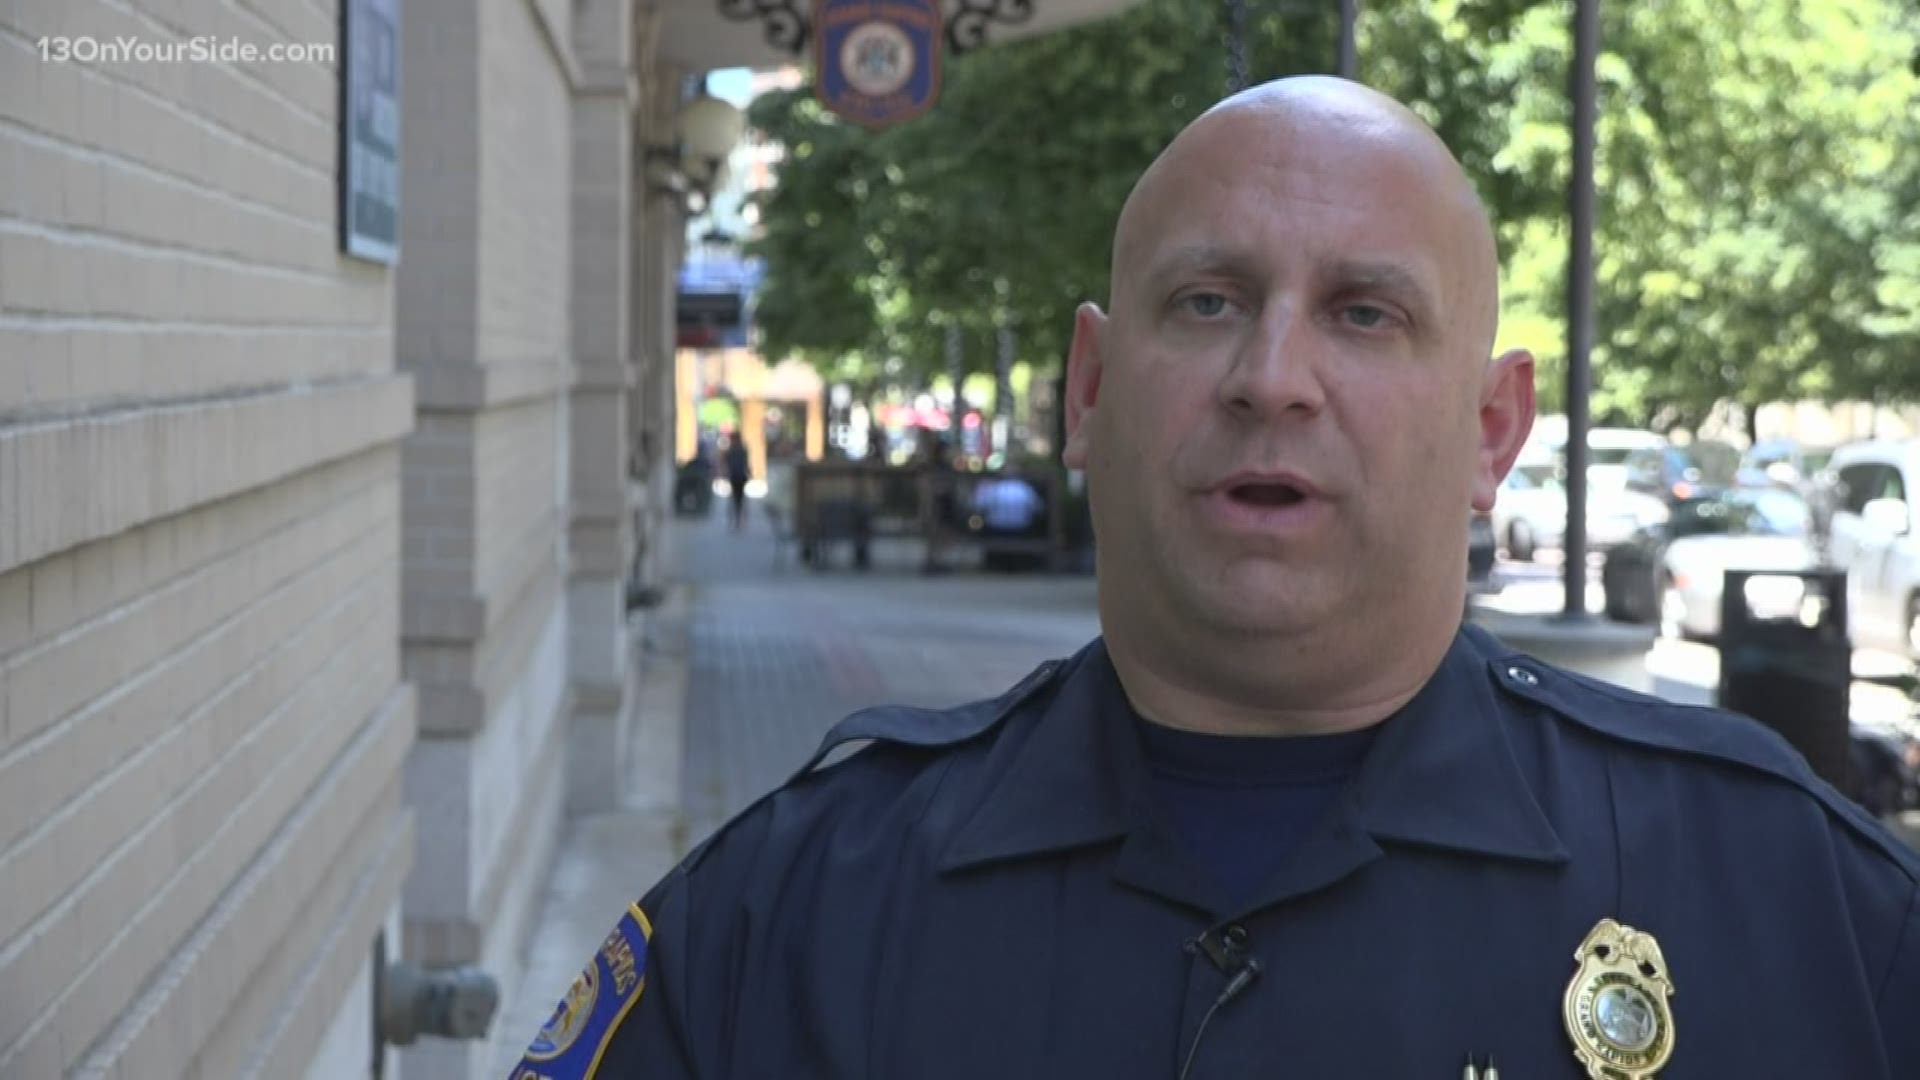 We spoke to a Grand Rapids police officer about the trend.